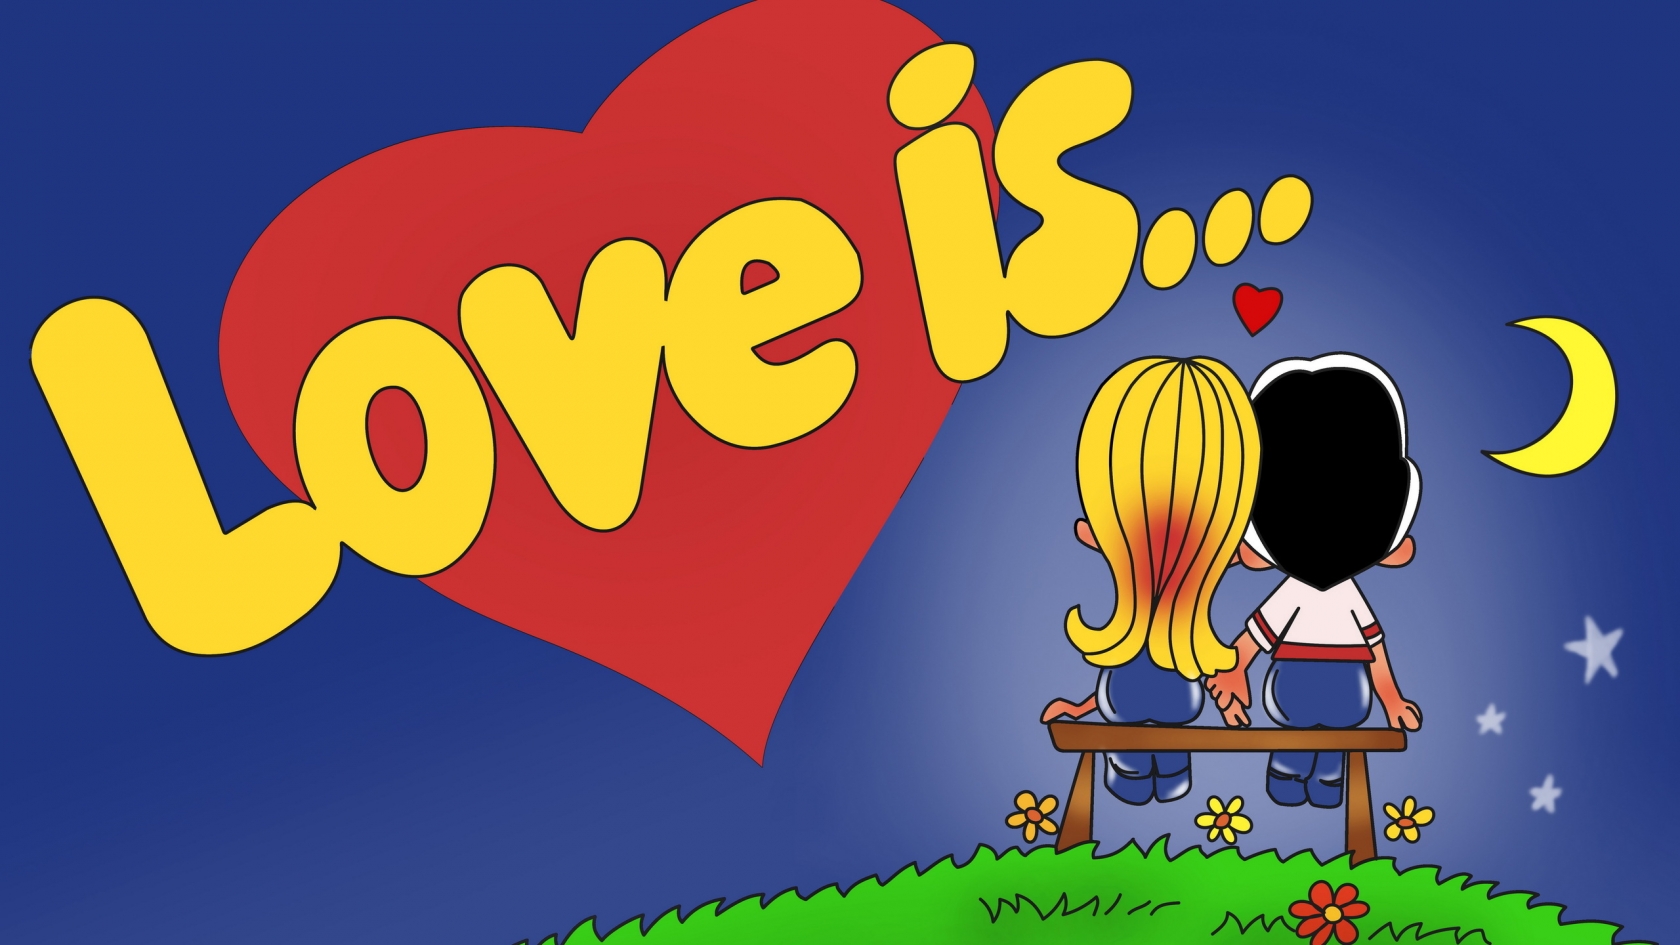 Love is for 1680 x 945 HDTV resolution